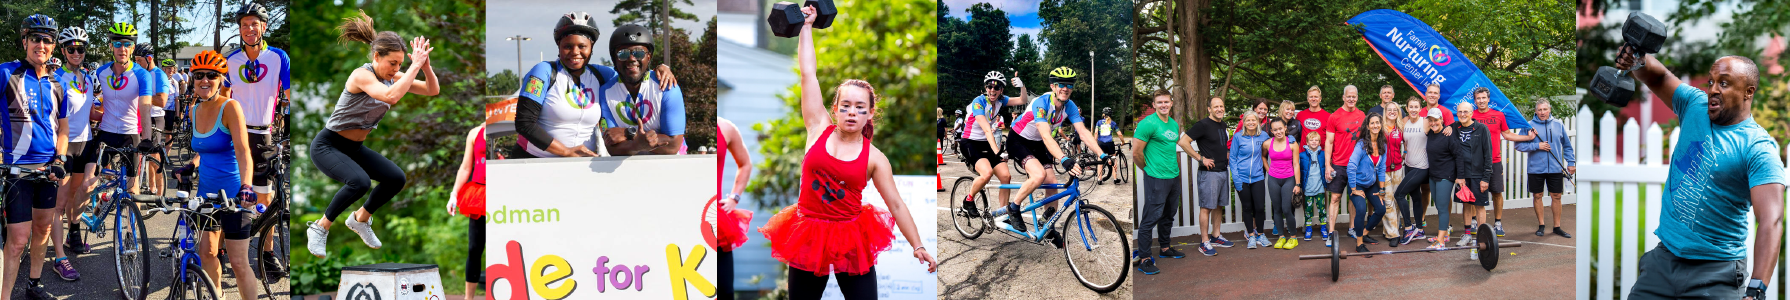 Images from FNC's Rodman Rides in years past: riders, Crossfit challengers, and participants posing.